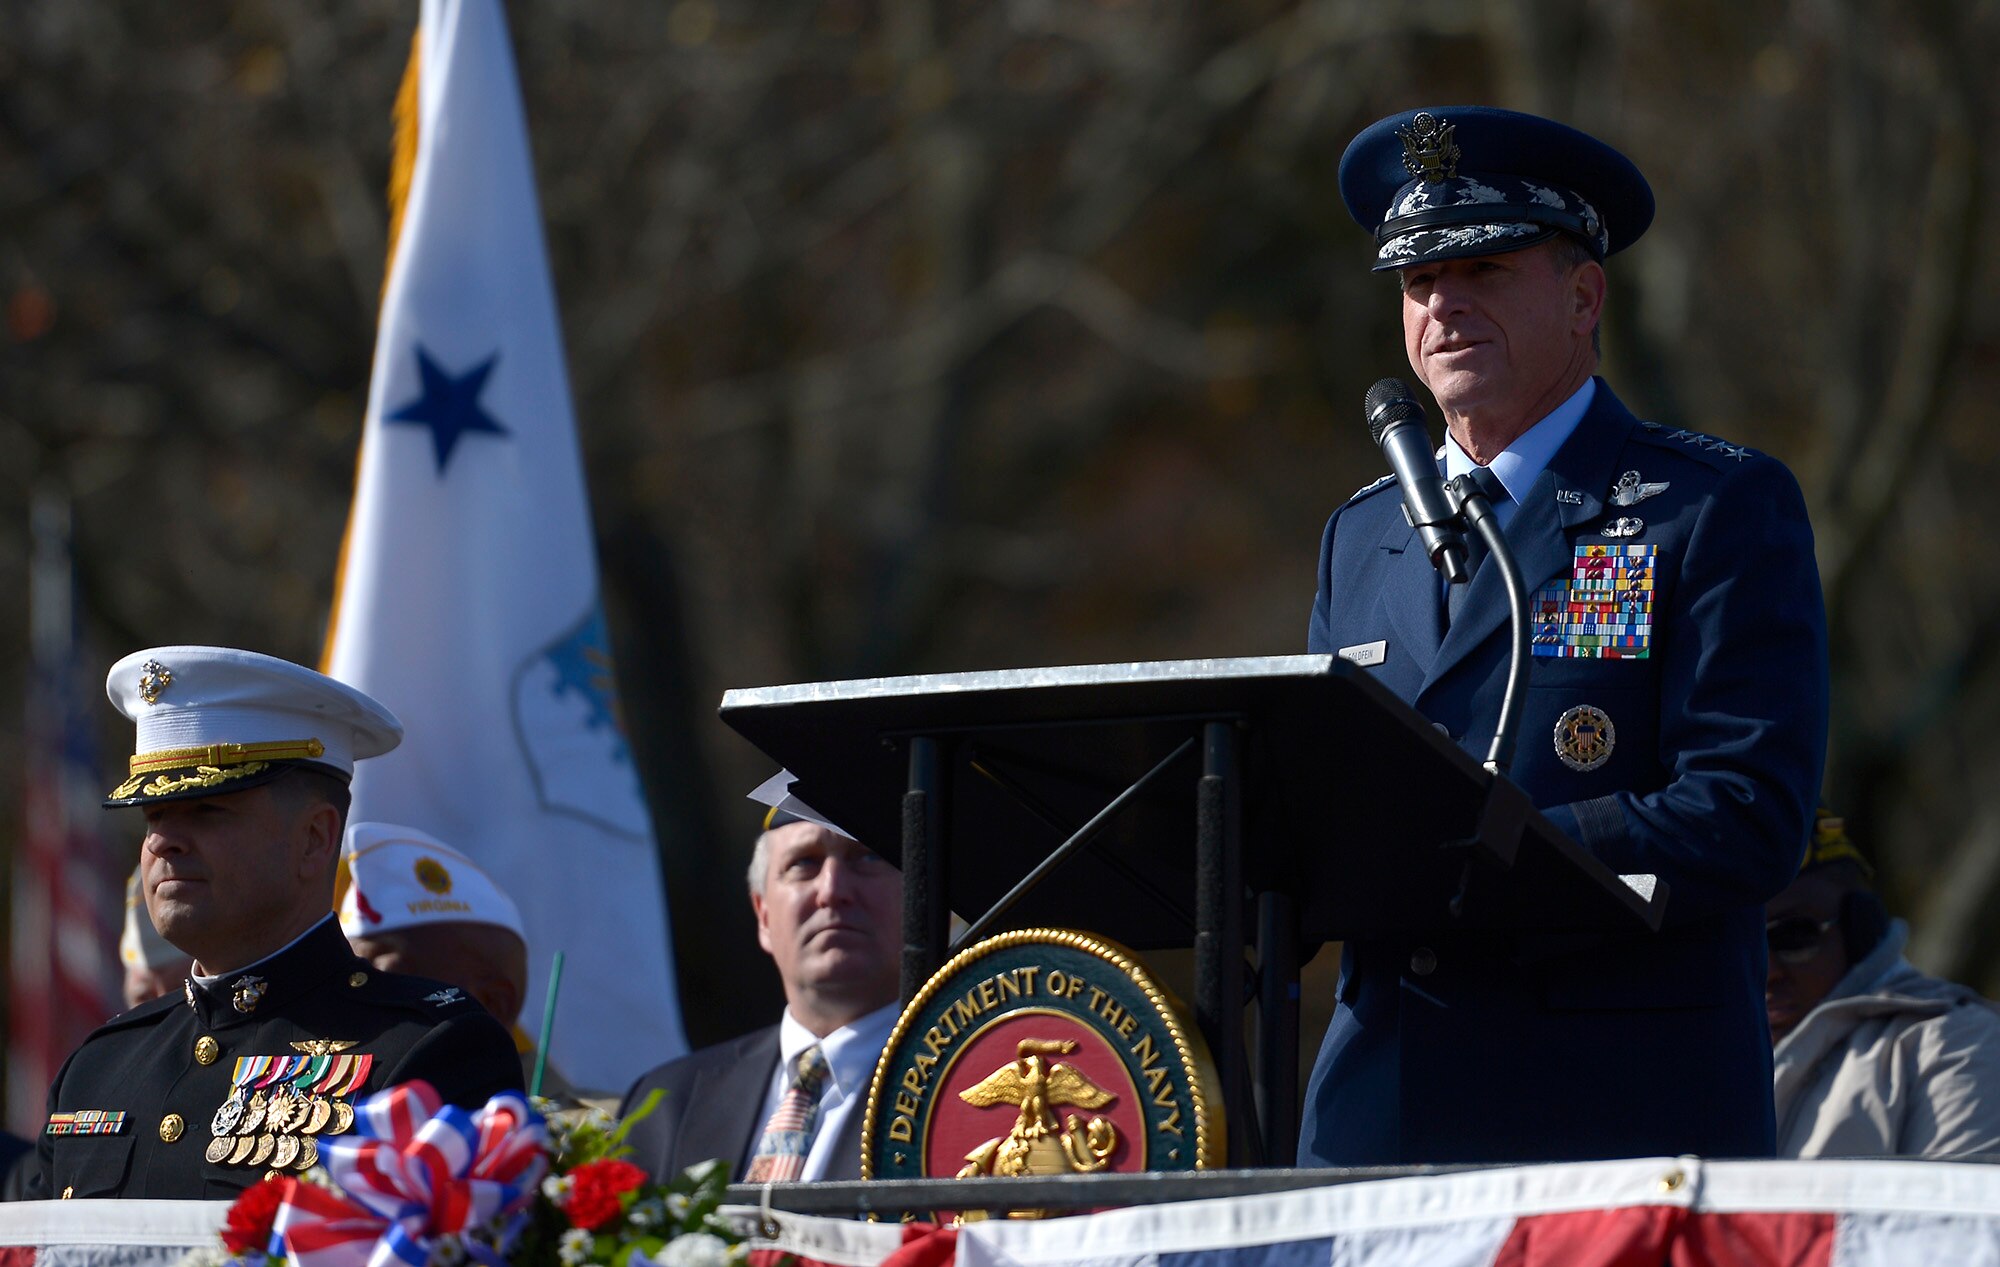 Air Force Chief of Staff Gen. David L. Goldfein delivers the keynote speech during a Veterans Day ceremony at Quantico National Cemetery in Quantico, Va., Nov. 11, 2017. The Veterans Day ceremony is an annual event hosted by the Potomac Region Veterans Council. The event featured a performance by the Quantico Marine Corps Band.  (U.S. Air Force photo by Tech. Sgt. Dan DeCook)